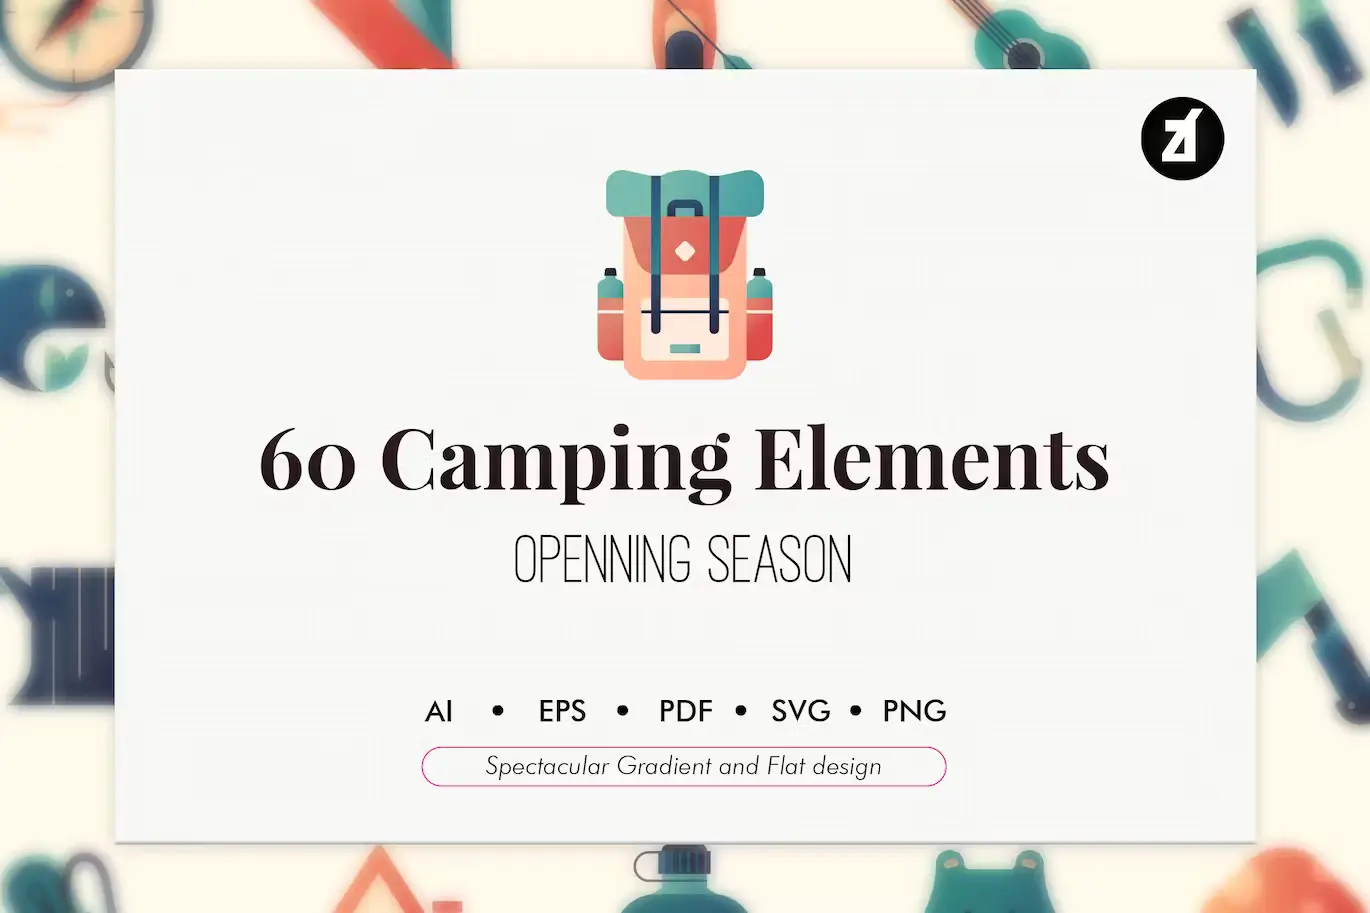 60 Camping Elements